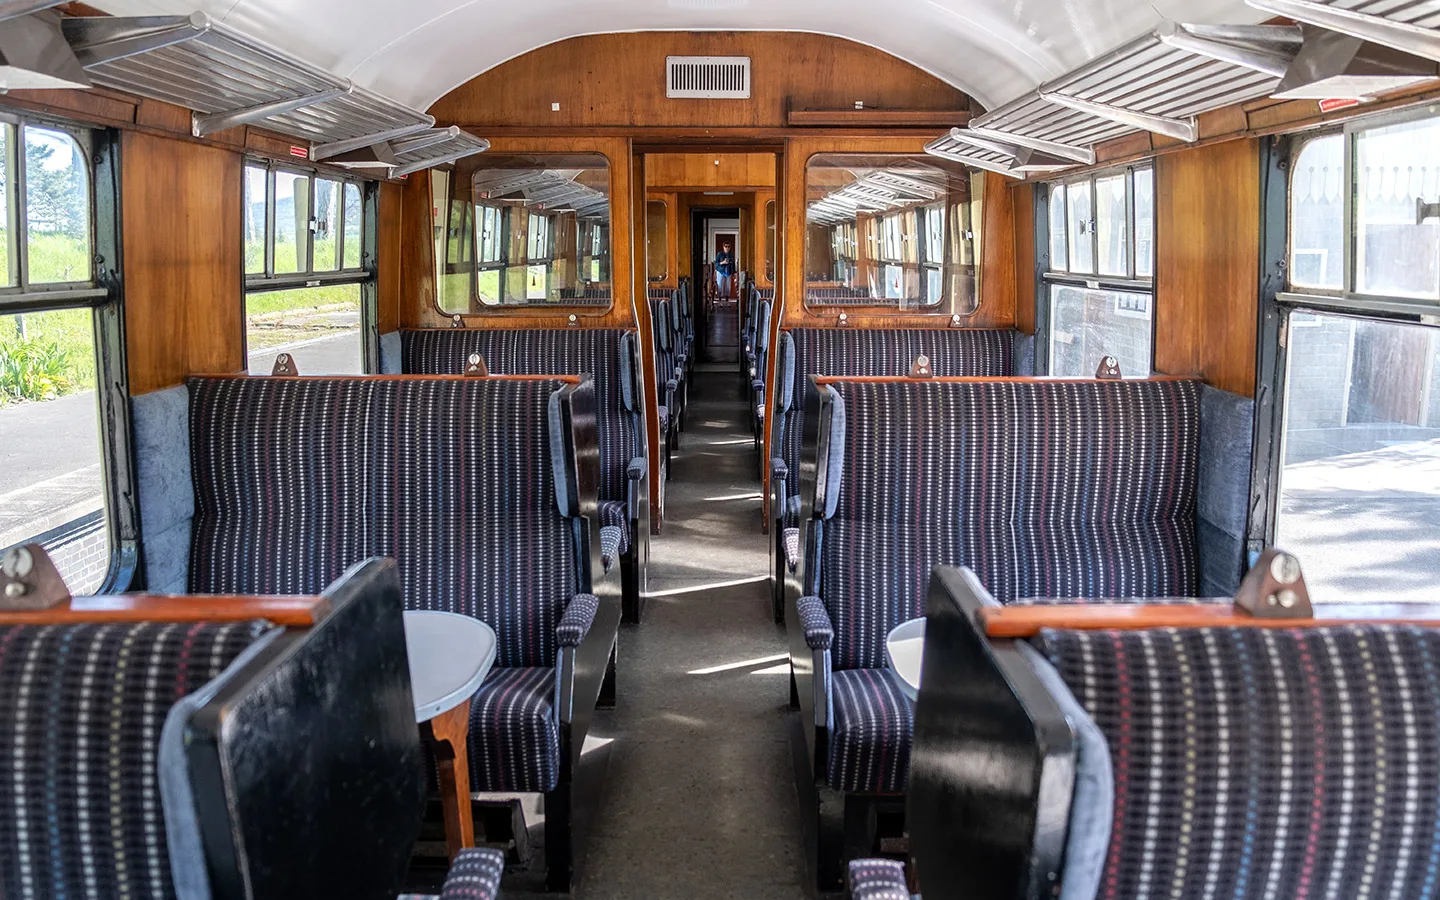 Comfy seats on board the Cotswold steam train